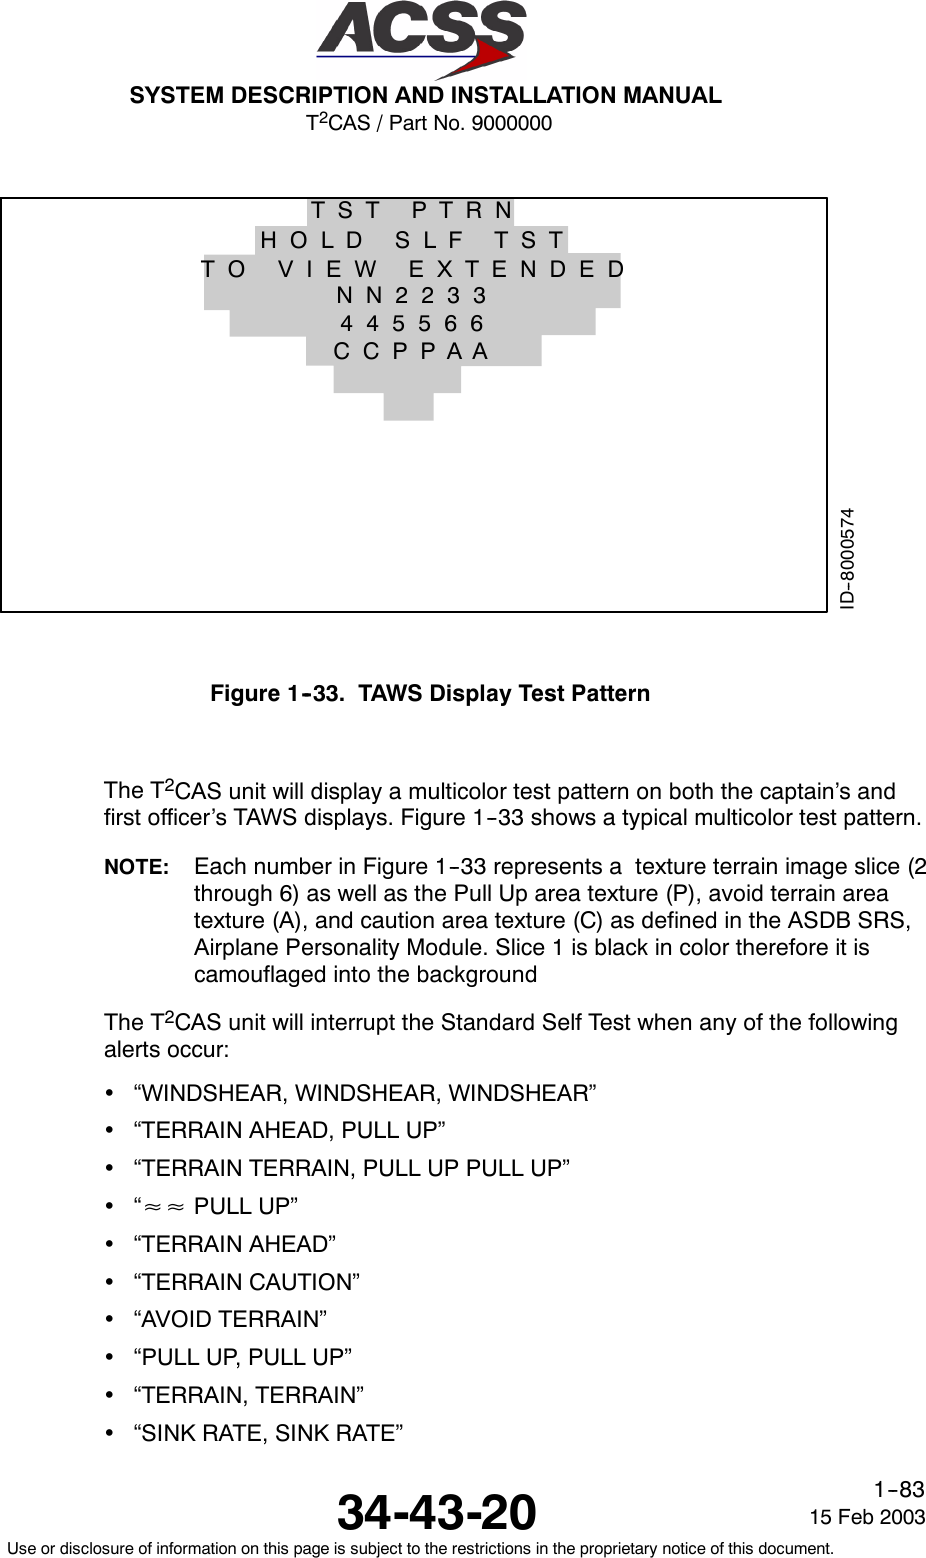 T2CAS / Part No. 9000000SYSTEM DESCRIPTION AND INSTALLATION MANUAL34-43-20 15 Feb 2003Use or disclosure of information on this page is subject to the restrictions in the proprietary notice of this document.1--83ID--8000574TST PTRNHOLD SLF TSTTO VIEW EXTENDEDNN2233445566CCPPAAFigure 1--33. TAWS Display Test PatternThe T2CAS unit will display a multicolor test pattern on both the captain’s andfirst officer’s TAWS displays. Figure 1--33 shows a typical multicolor test pattern.NOTE: Each number in Figure 1--33 represents a texture terrain image slice (2through 6) as well as the Pull Up area texture (P), avoid terrain areatexture (A), and caution area texture (C) as defined in the ASDB SRS,Airplane Personality Module. Slice 1 is black in color therefore it iscamouflaged into the backgroundThe T2CAS unit will interrupt the Standard Self Test when any of the followingalerts occur:•“WINDSHEAR, WINDSHEAR, WINDSHEAR”•“TERRAIN AHEAD, PULL UP”•“TERRAIN TERRAIN, PULL UP PULL UP”•“≈≈ PULL UP”•“TERRAIN AHEAD”•“TERRAIN CAUTION”•“AVOID TERRAIN”•“PULL UP, PULL UP”•“TERRAIN, TERRAIN”•“SINK RATE, SINK RATE”